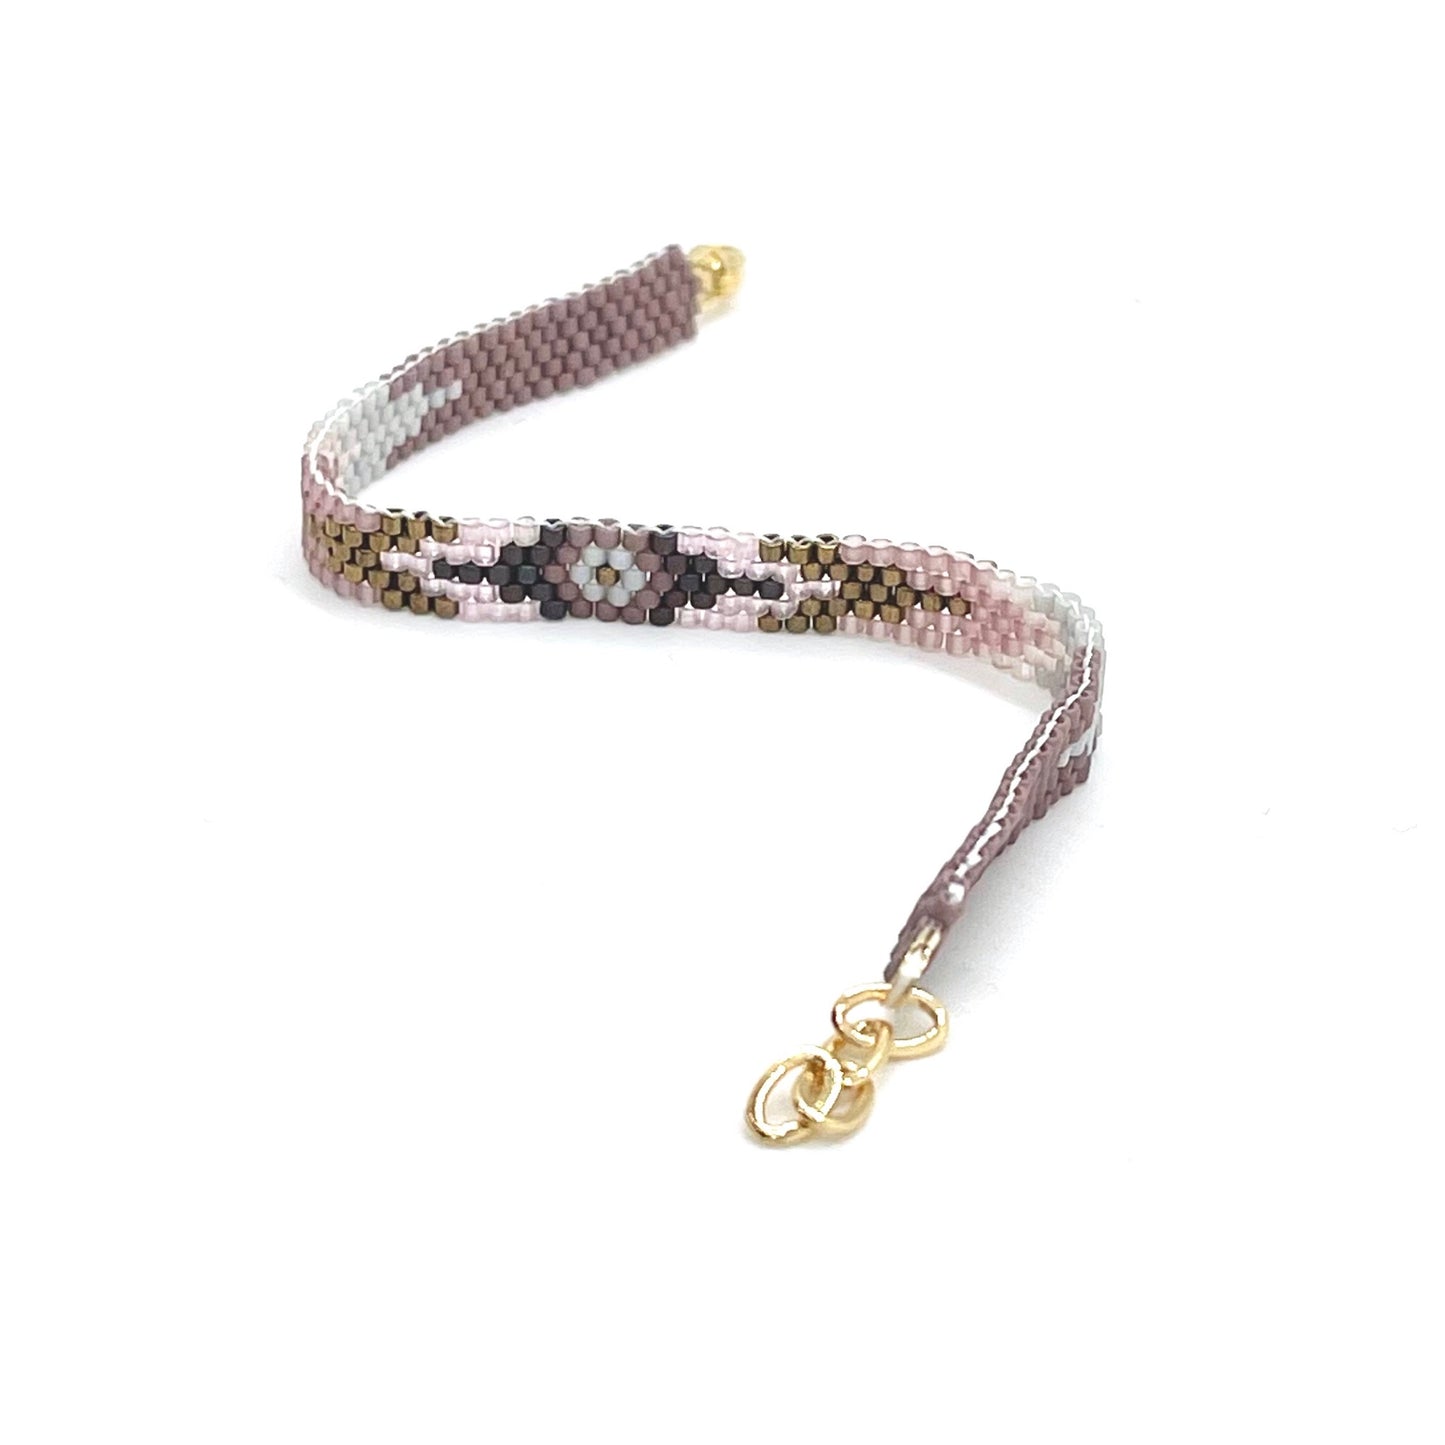 Purple beaded peyote stitch bracelet with seed beads in mauve, plum, rose, and bronze. Hand stitched in an arrow pattern with a flower center.